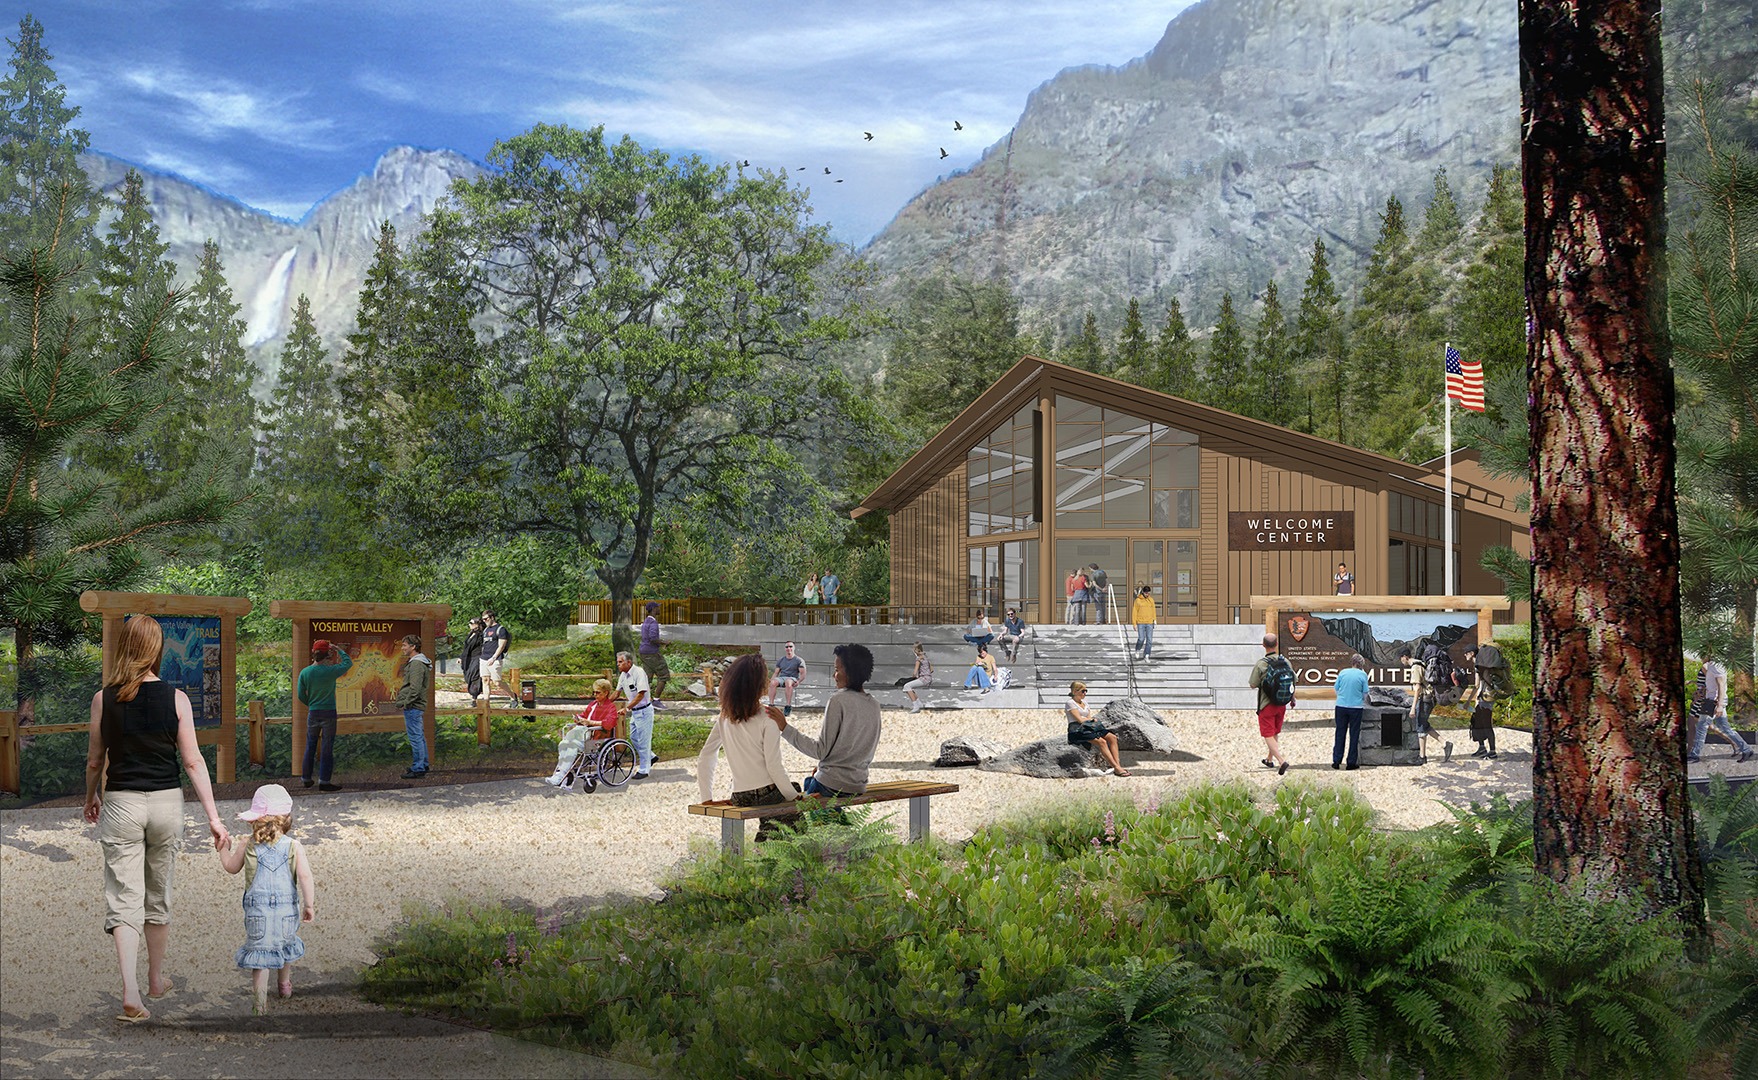 An artistic rendering of the planned plaza and informational signs outside the new Welcome Center in Yosemite Valley. Yosemite Falls is visible in the background. The Welcome Center will be located in a refurbished building (formerly the Sport Shop/Village Store) in eastern Yosemite Village.